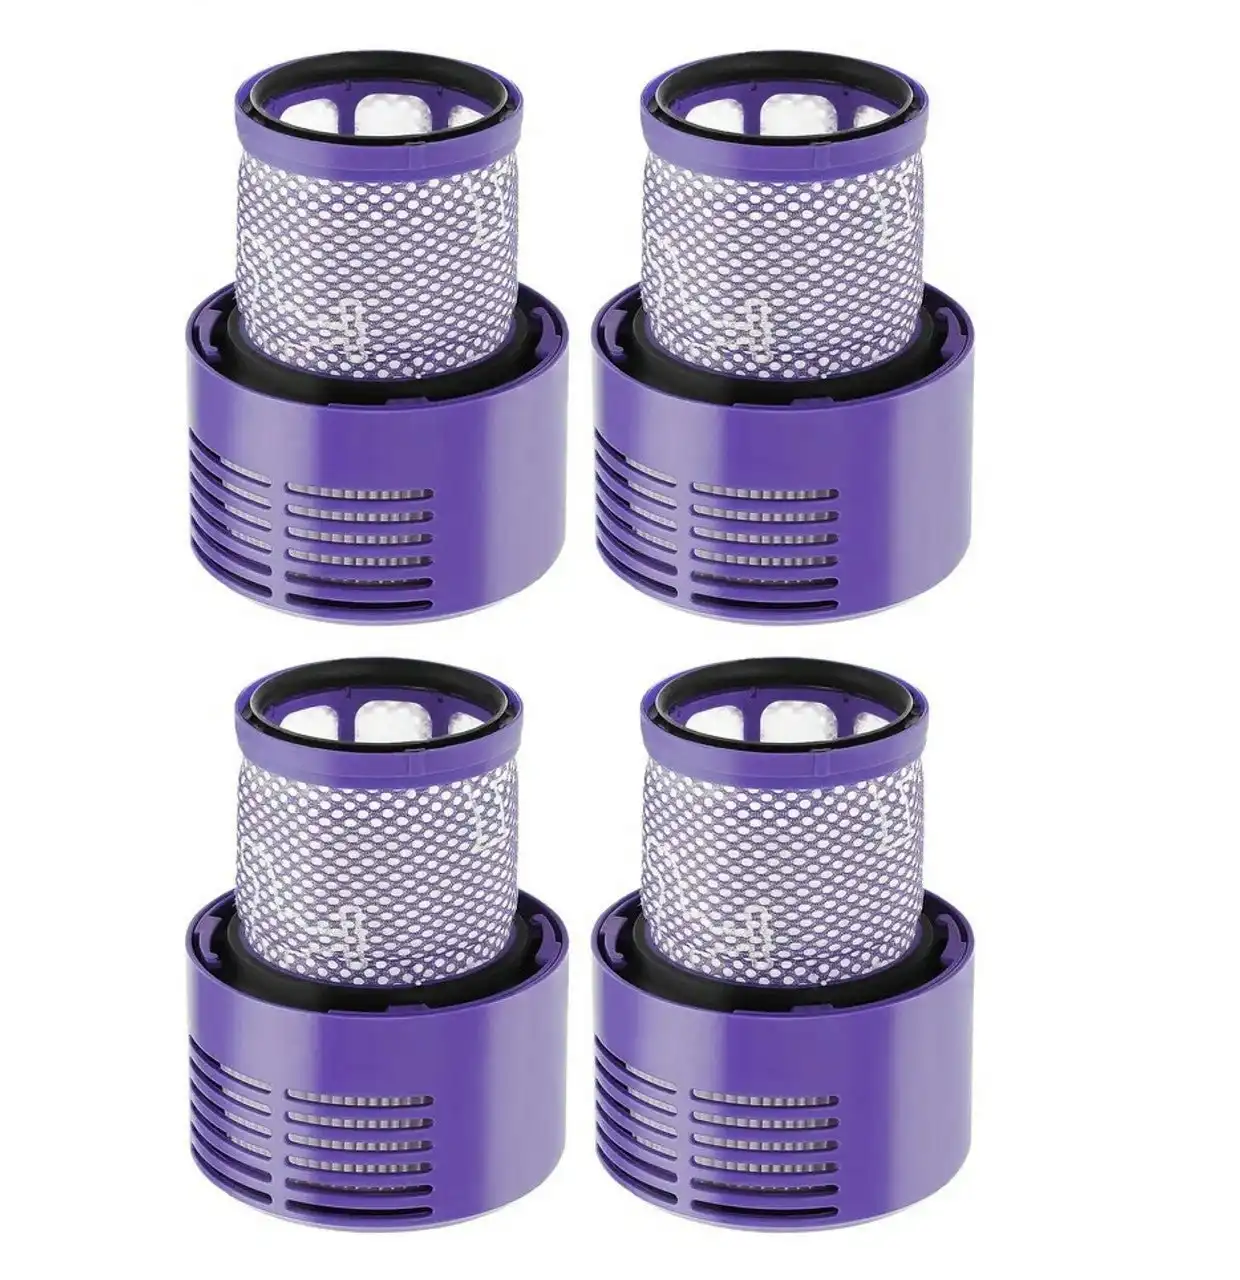 4 x HEPA Filters for Dyson Cyclone V10 SV-12 Vacuum Cleaners